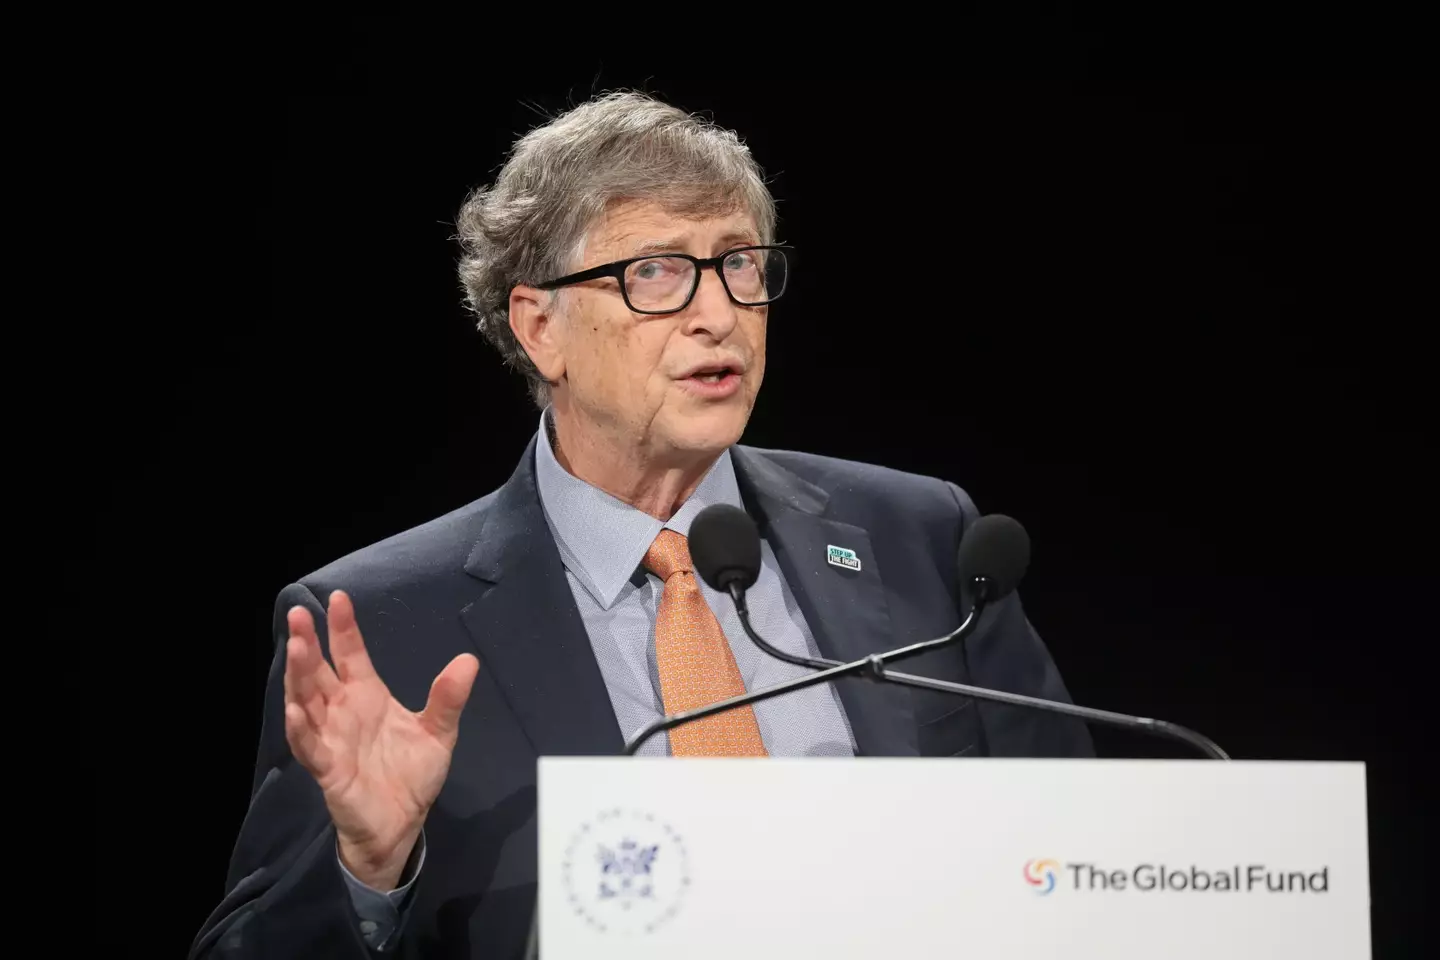 Bill Gates is currently the sixth richest man in the world.